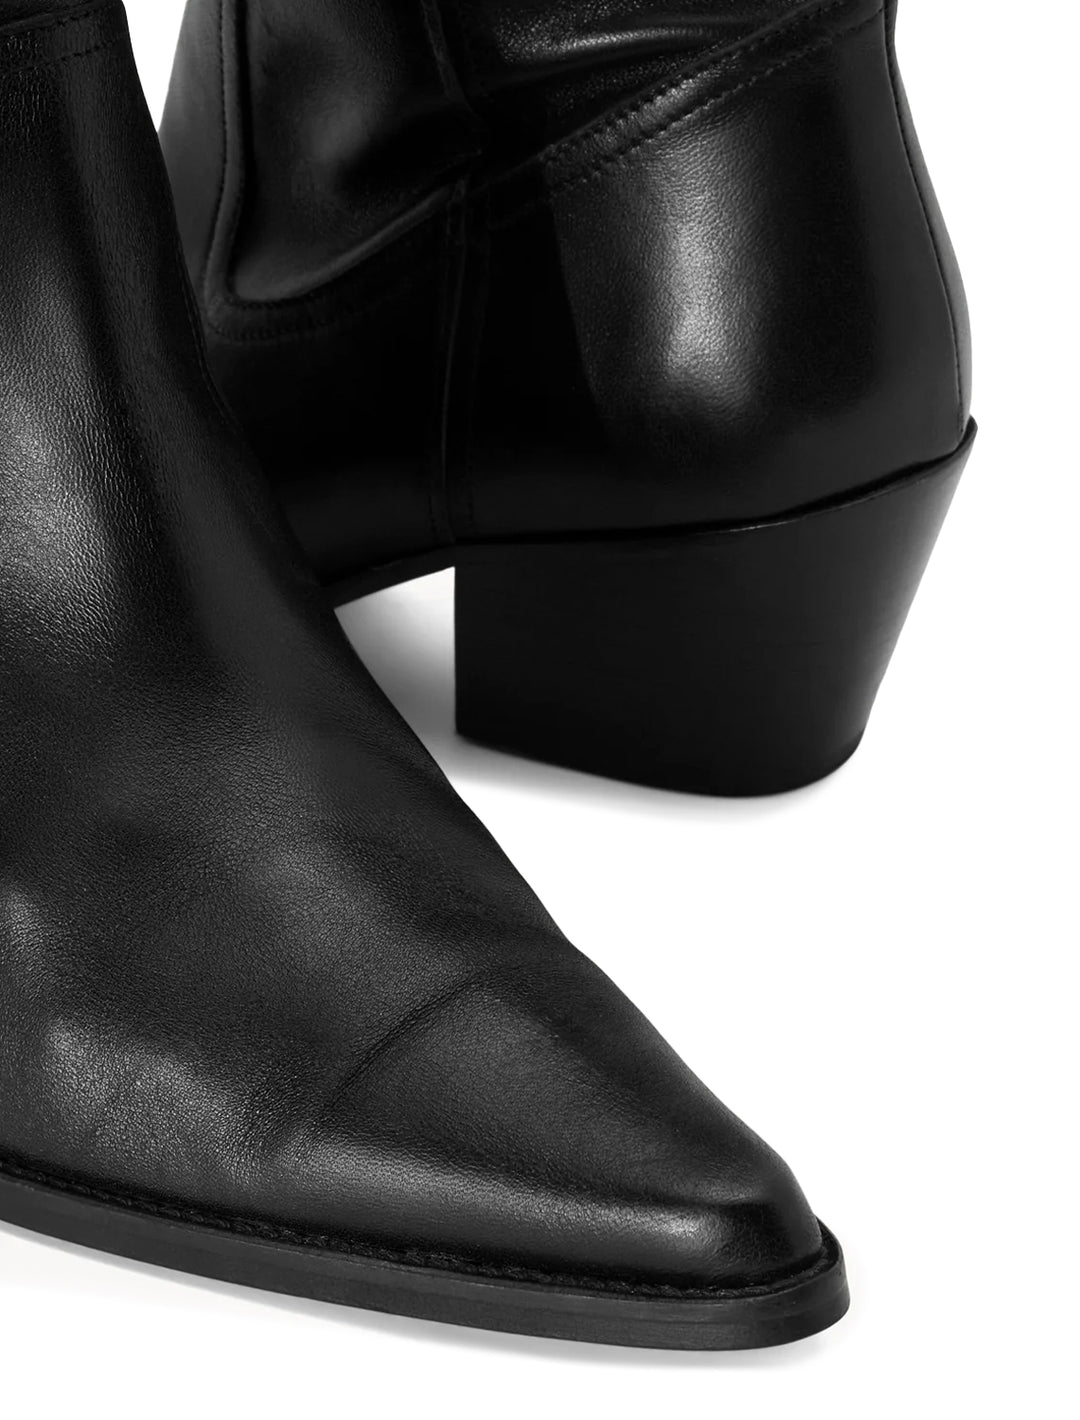 Close-up view of STAUD's june boot in black.